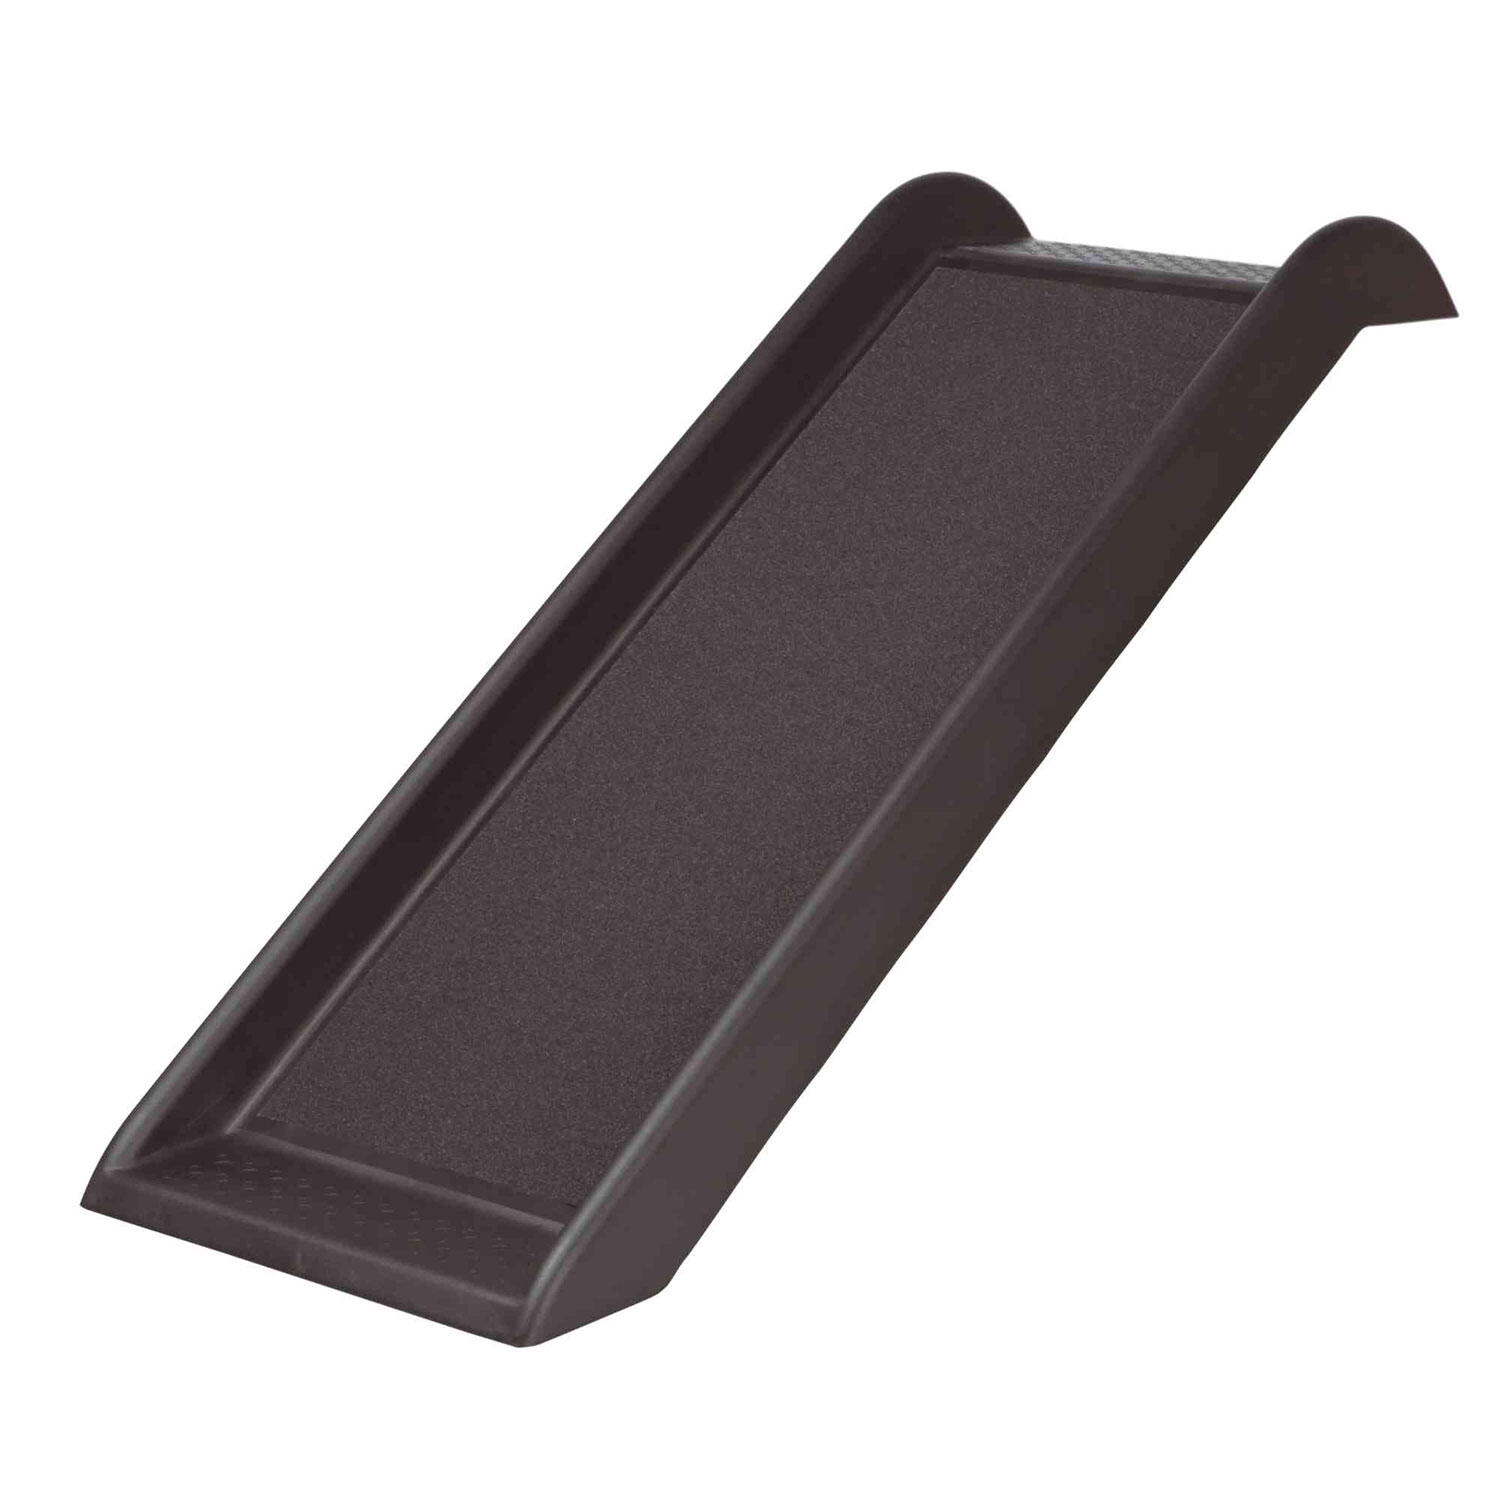 TRIXIE Trixie Petwalk Plastic Ramp for Small Dogs